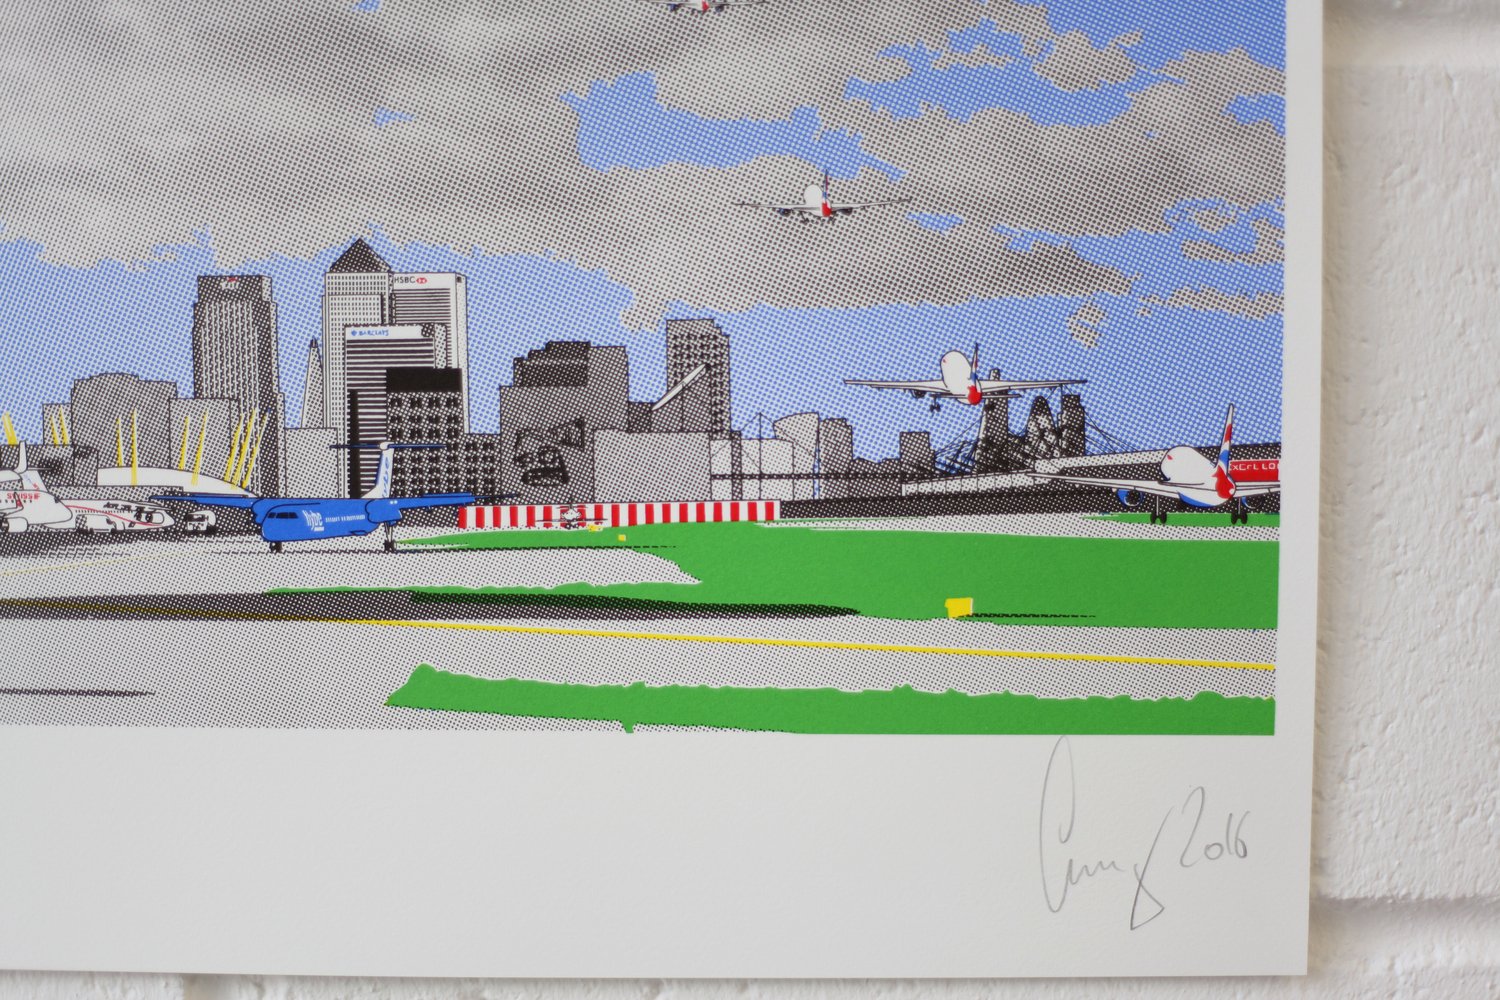 Image of London City Airport